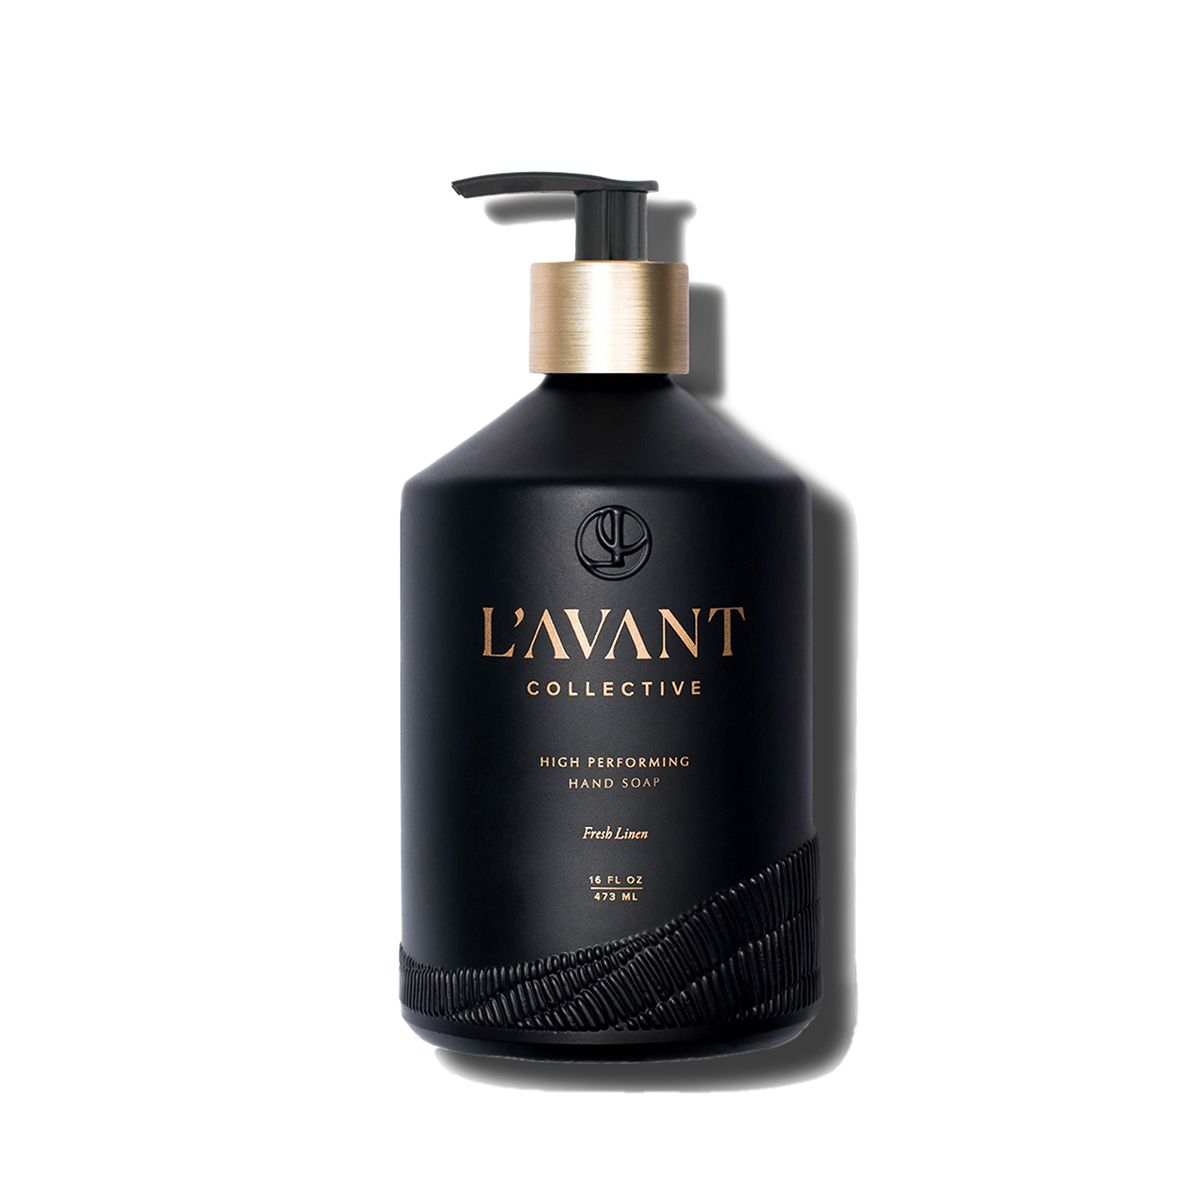 L'AVANT Collective 16 oz. High Performing Hand Soap Fresh Linen | The Container Store